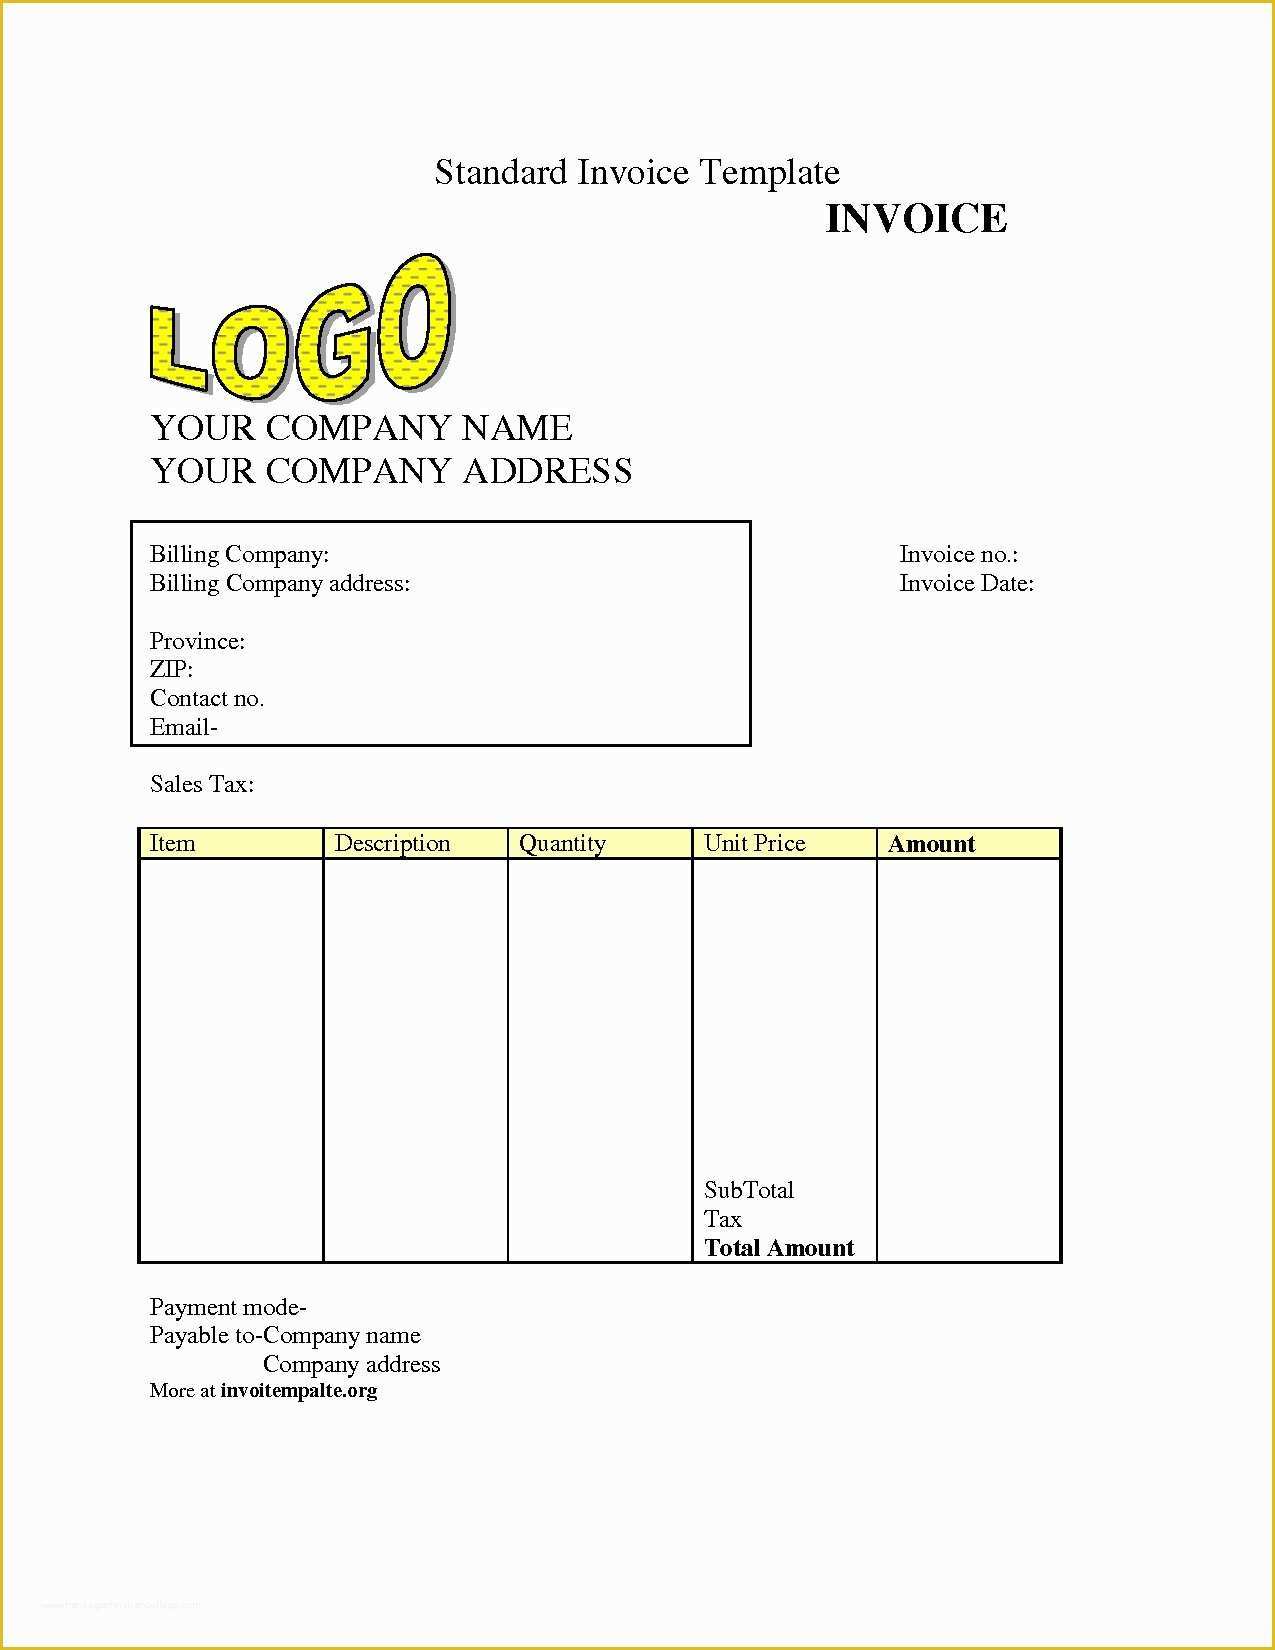 Creative Invoice Template Free Download Of Free Invoice Template Downloads Invoice Template Ideas